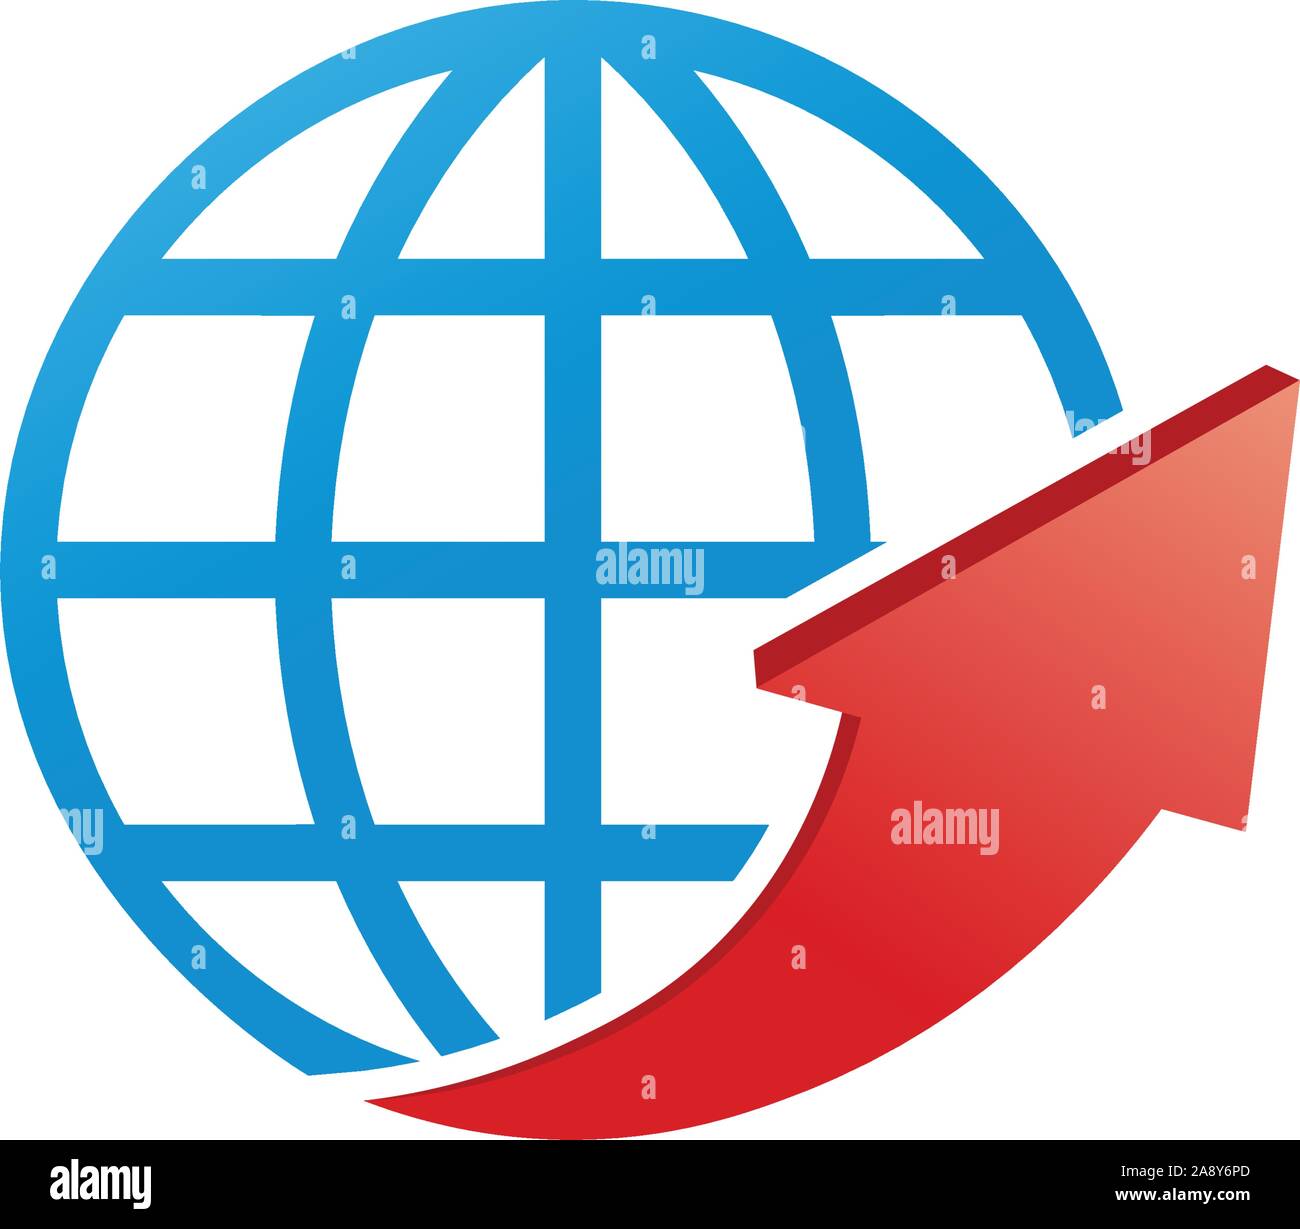 World finance business logo template. globe with arrow up. Stock Vector illustration isolated on white background. Stock Vector